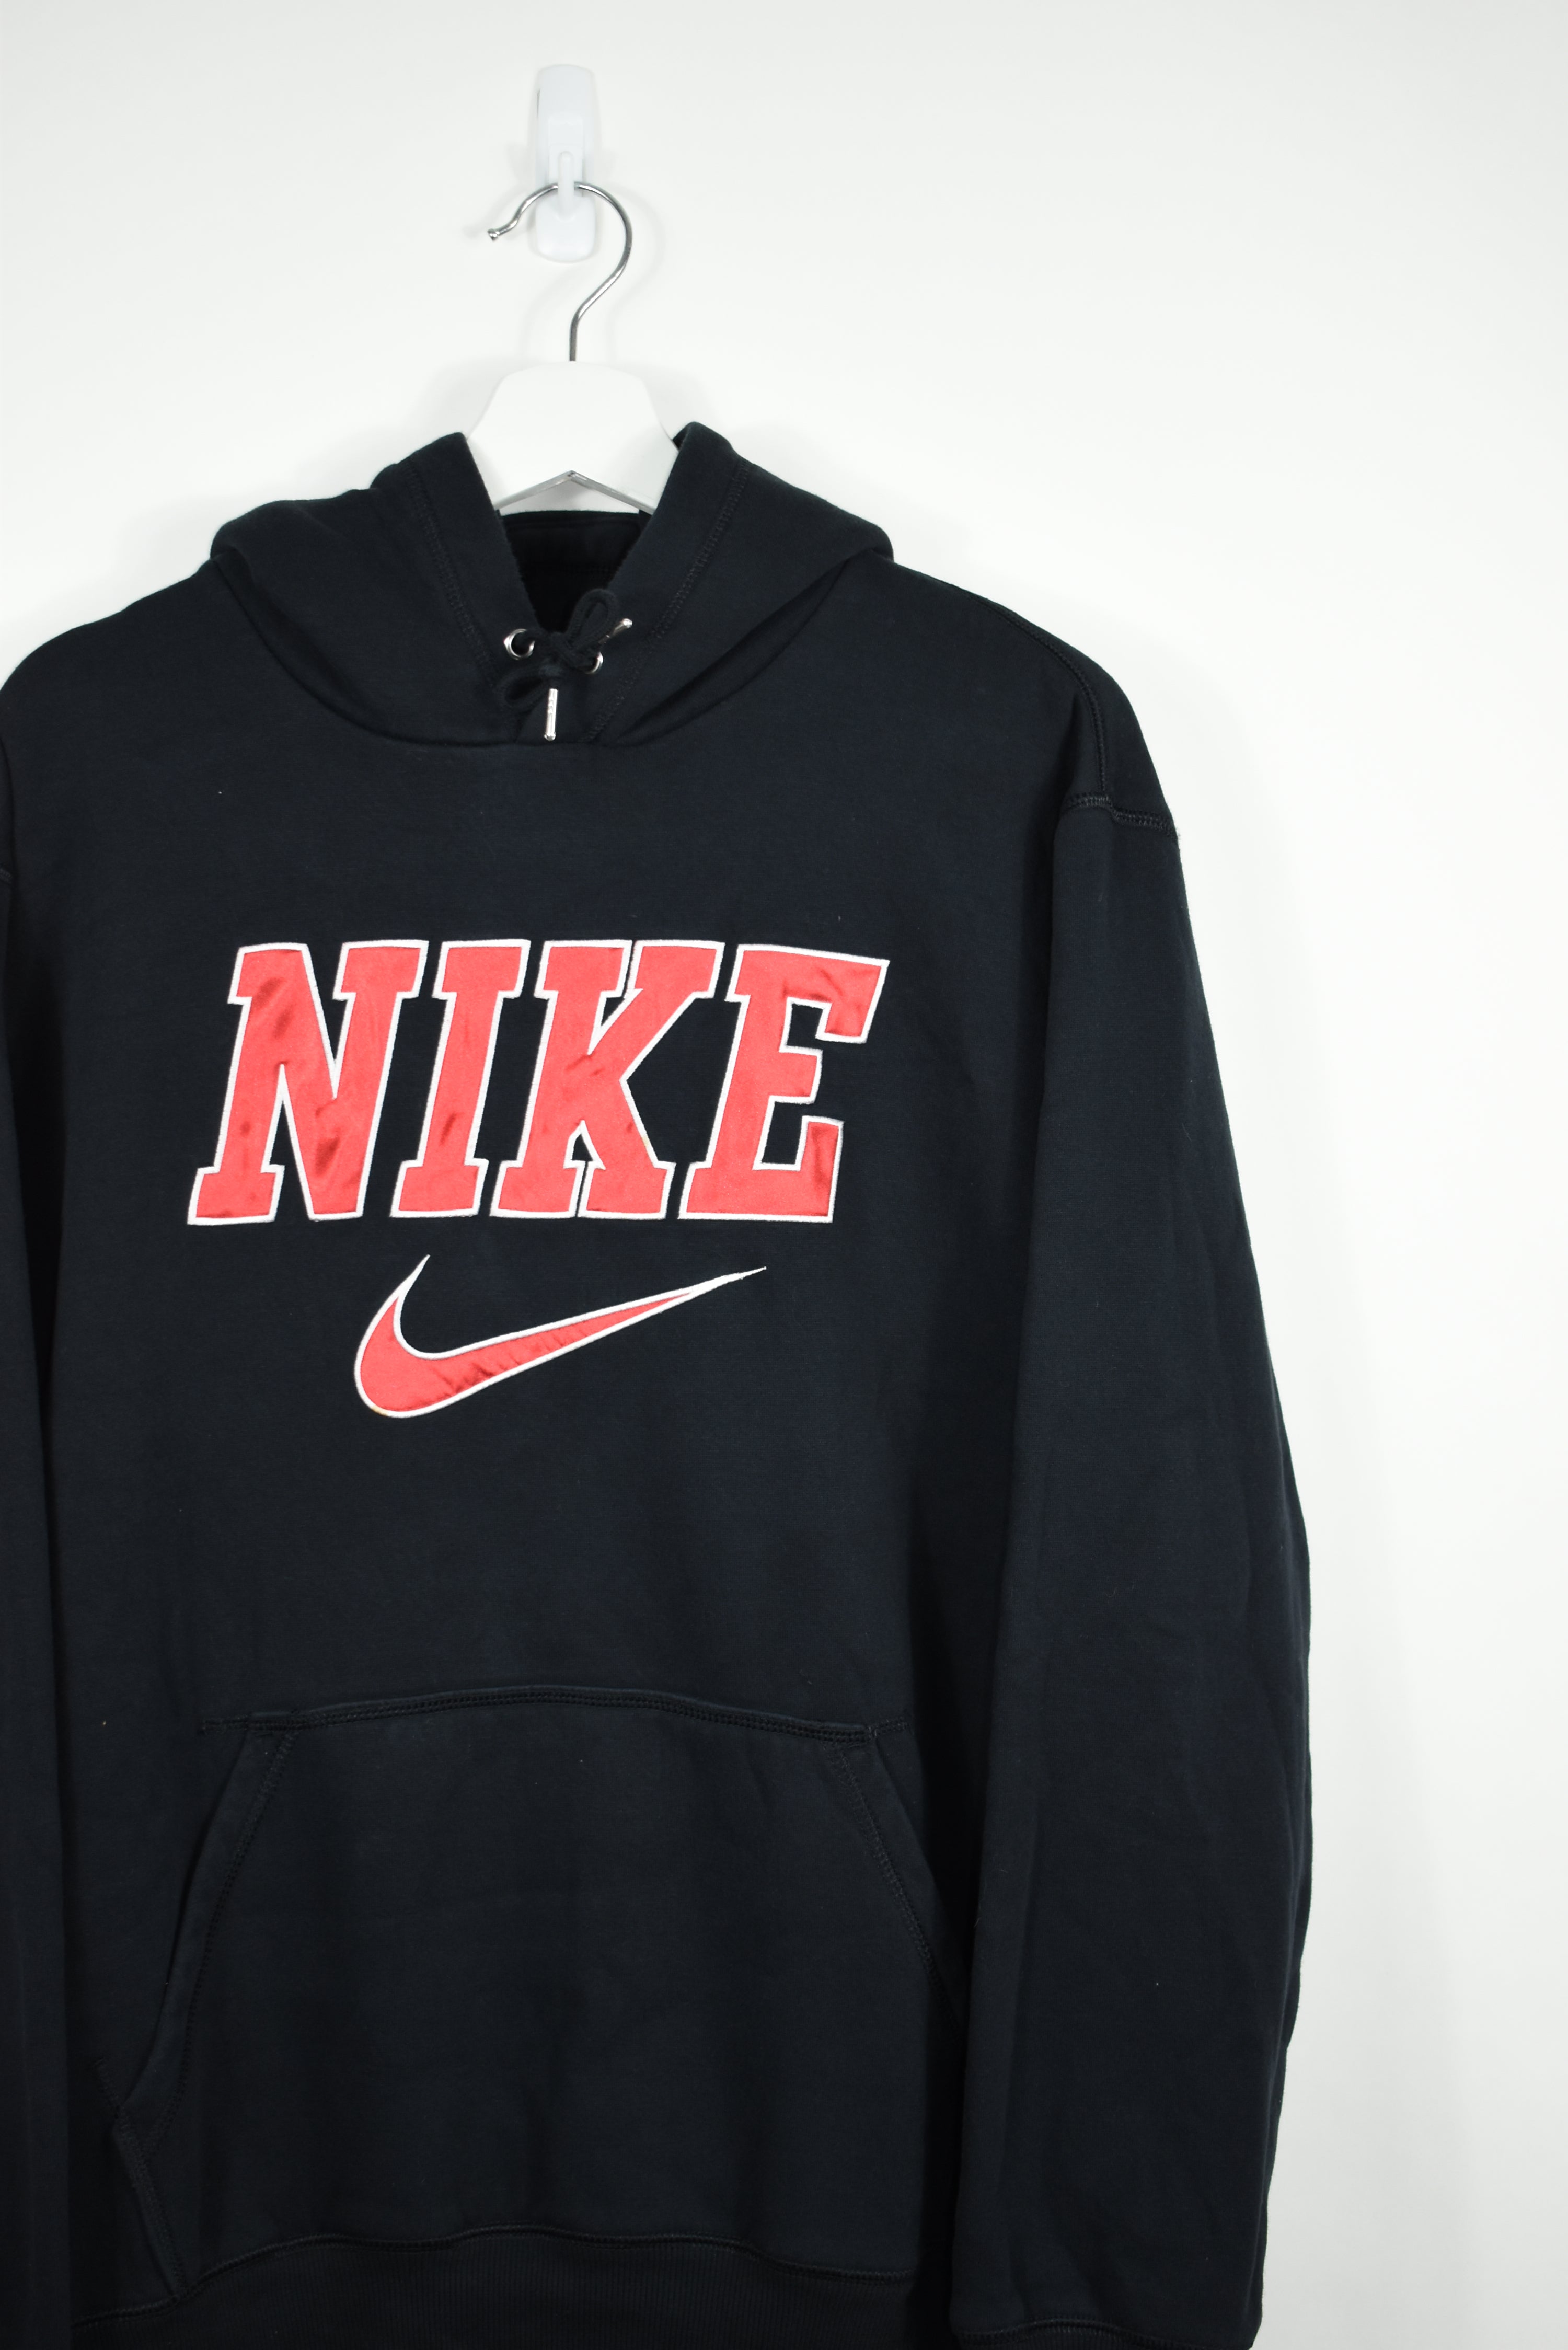 Vintage Nike Embroiderd Spellout Hoodie XL - REVIVED Vintage est. 2020